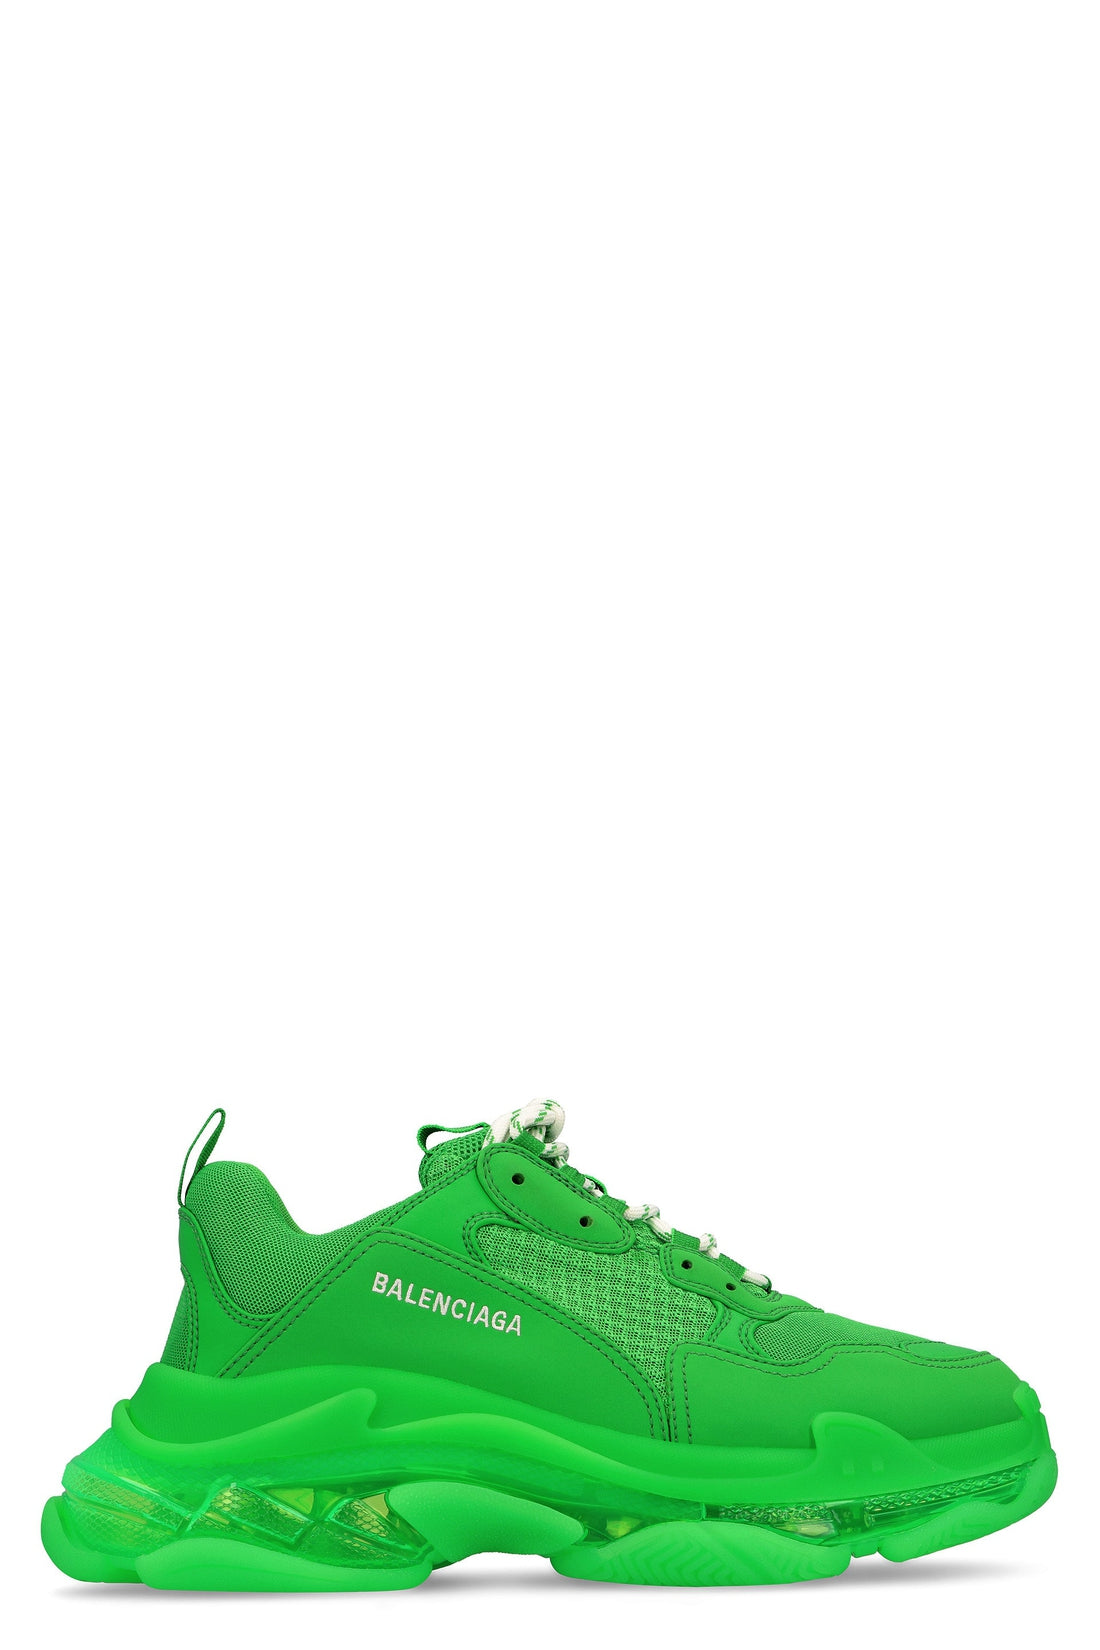 Balenciaga-OUTLET-SALE-Triple S Clear Sole chunky sneakers-ARCHIVIST